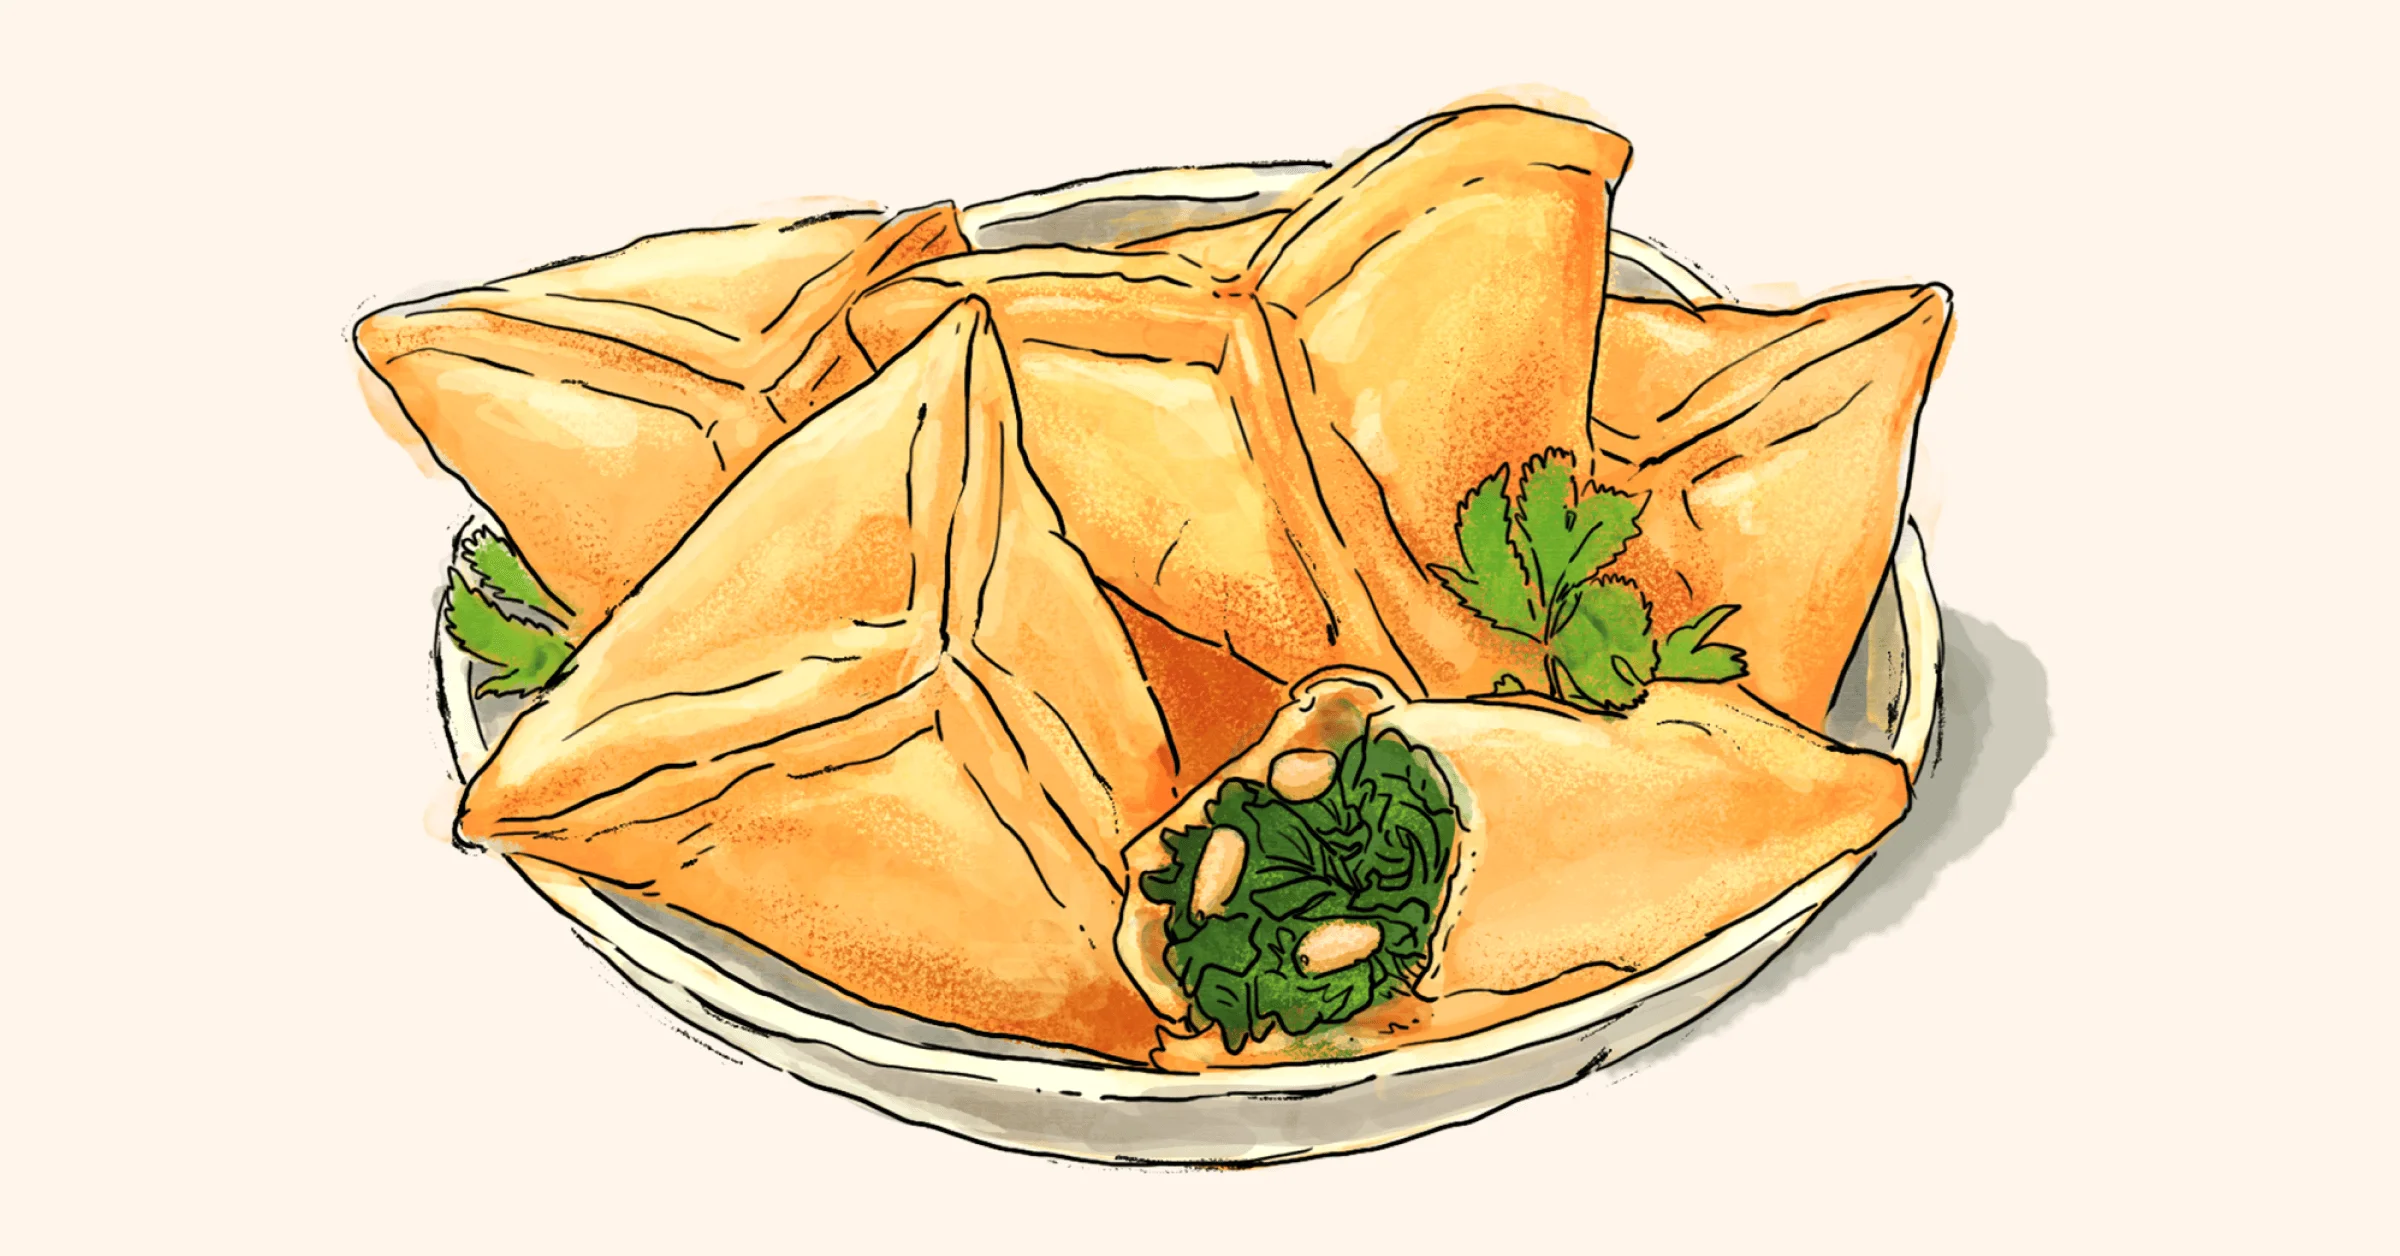 Illustration of Lebanese Spinach Pies